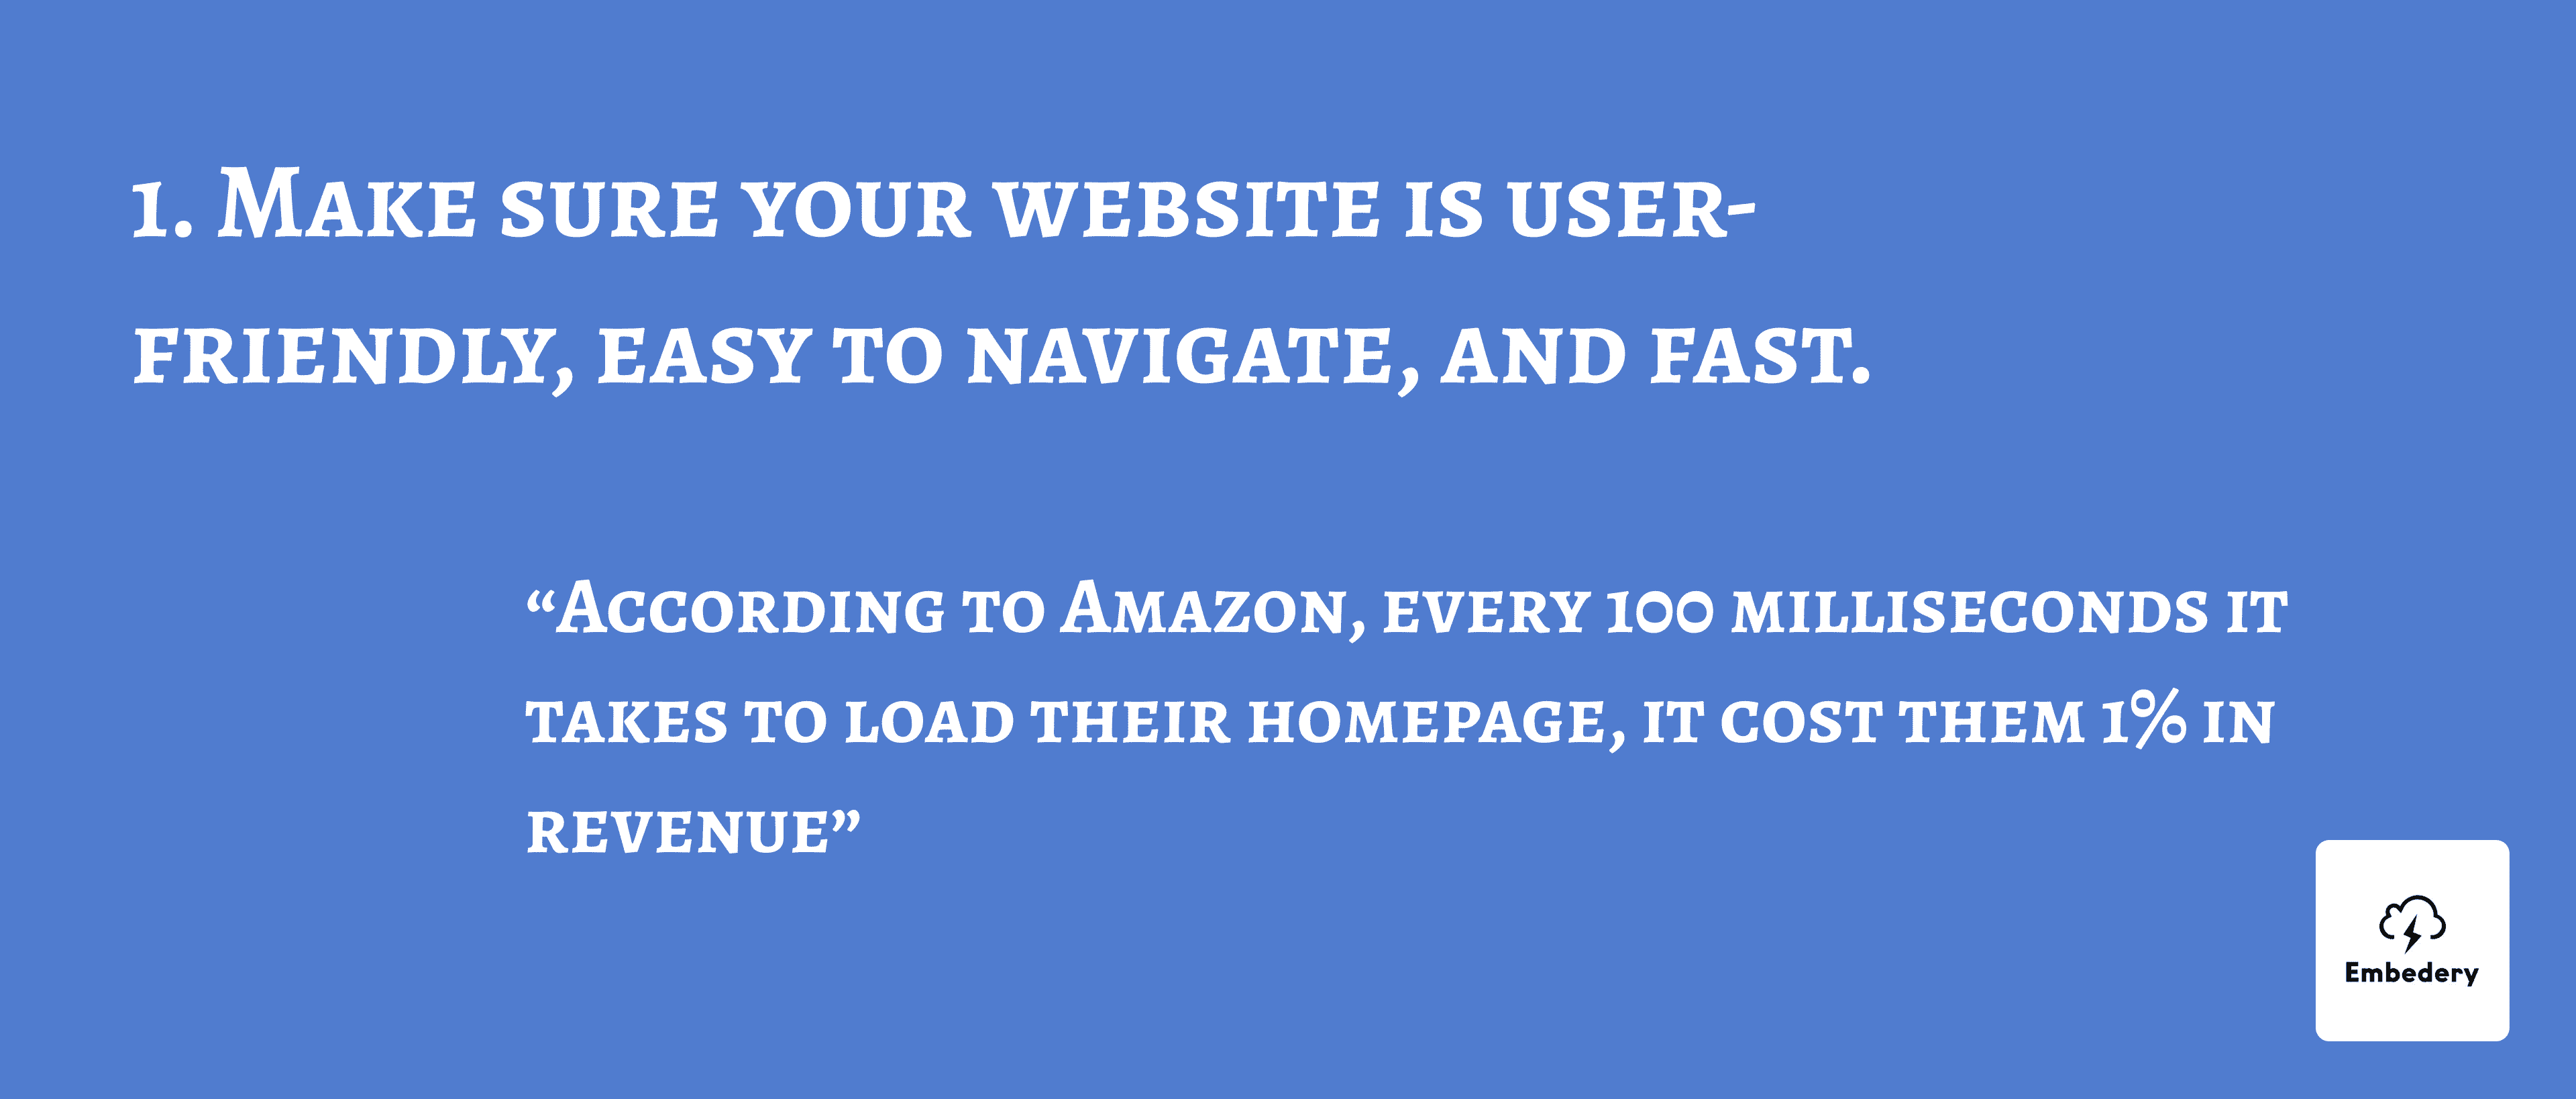 Make sure your website is user-friendly, easy to navigate, and fast